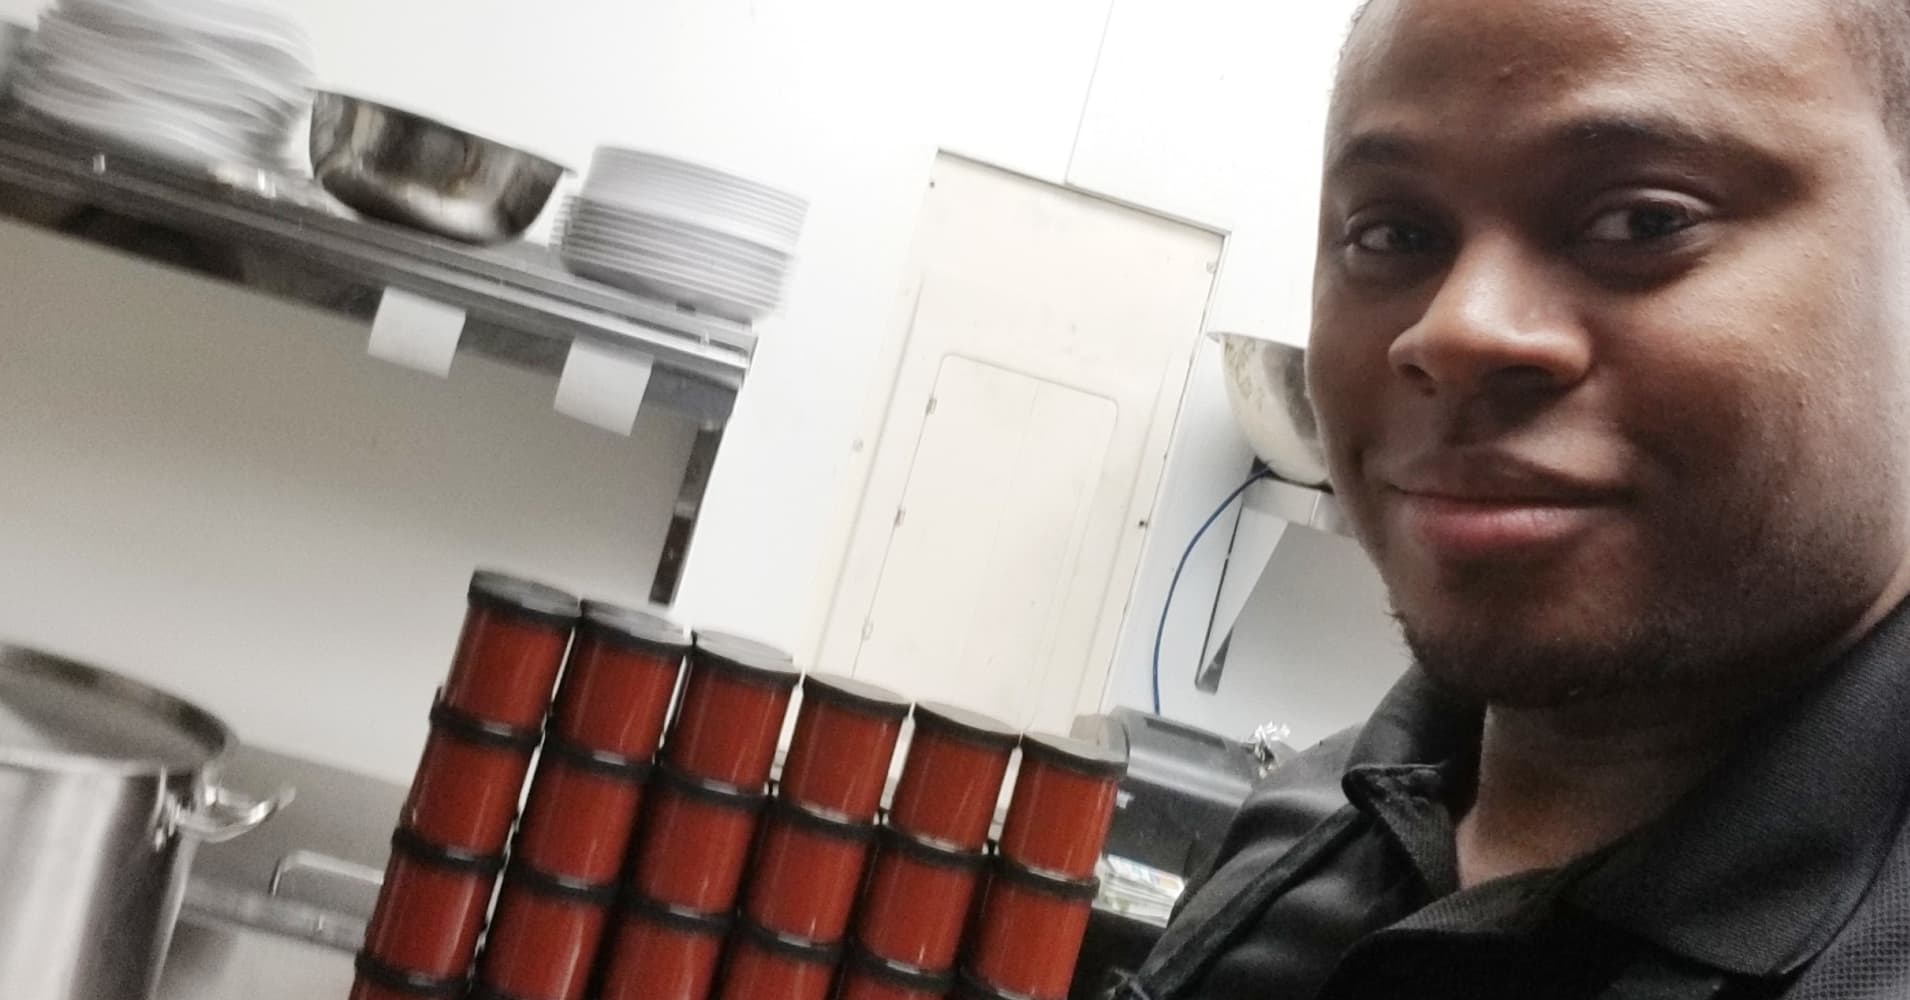 Amazon security guard launched his own barbecue sauce business on Amazon